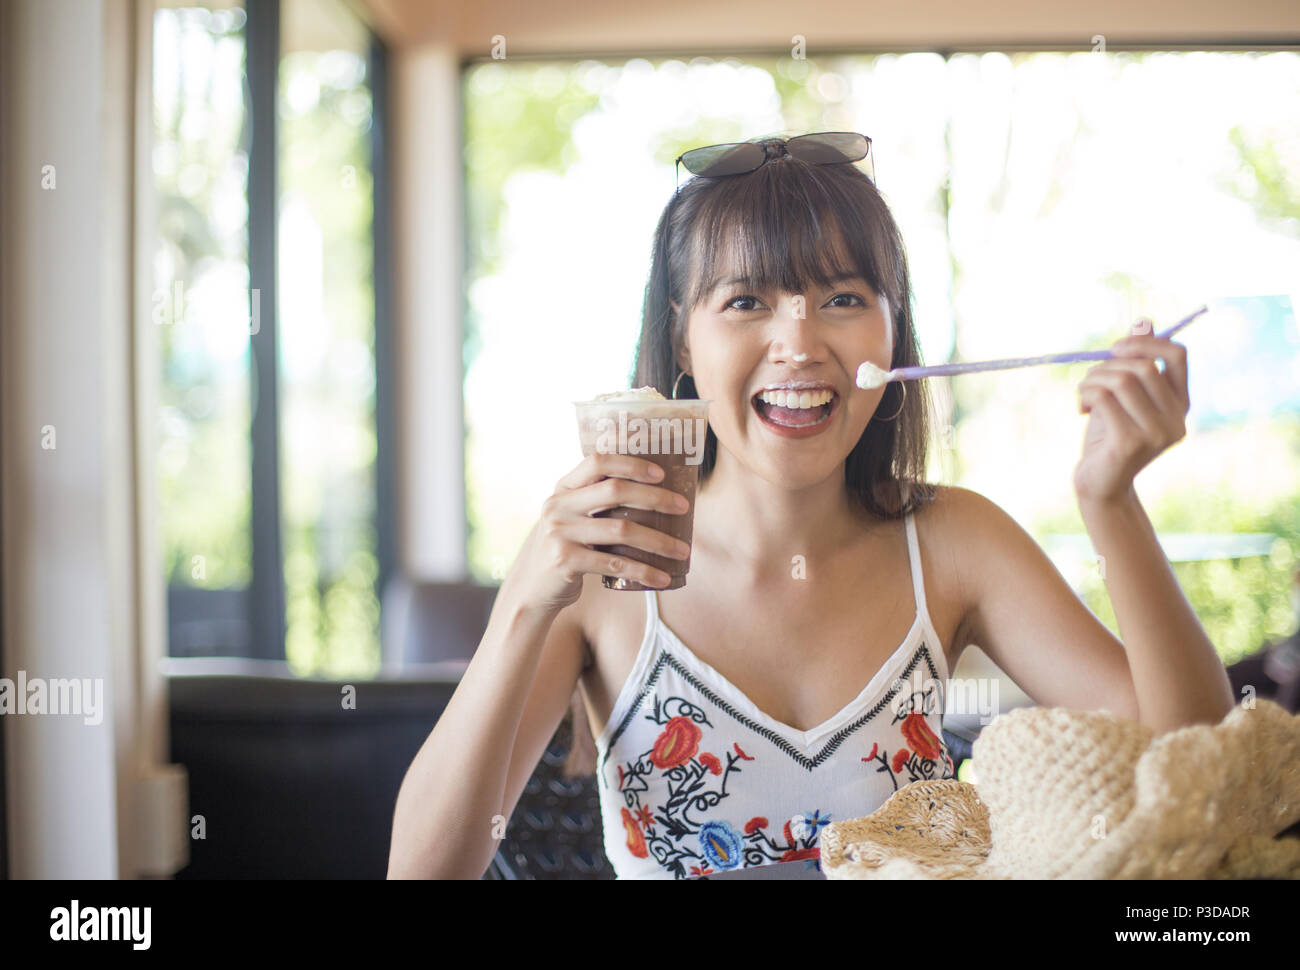 Young girl smile enjoy and happy drinking cold drink Stock Photo